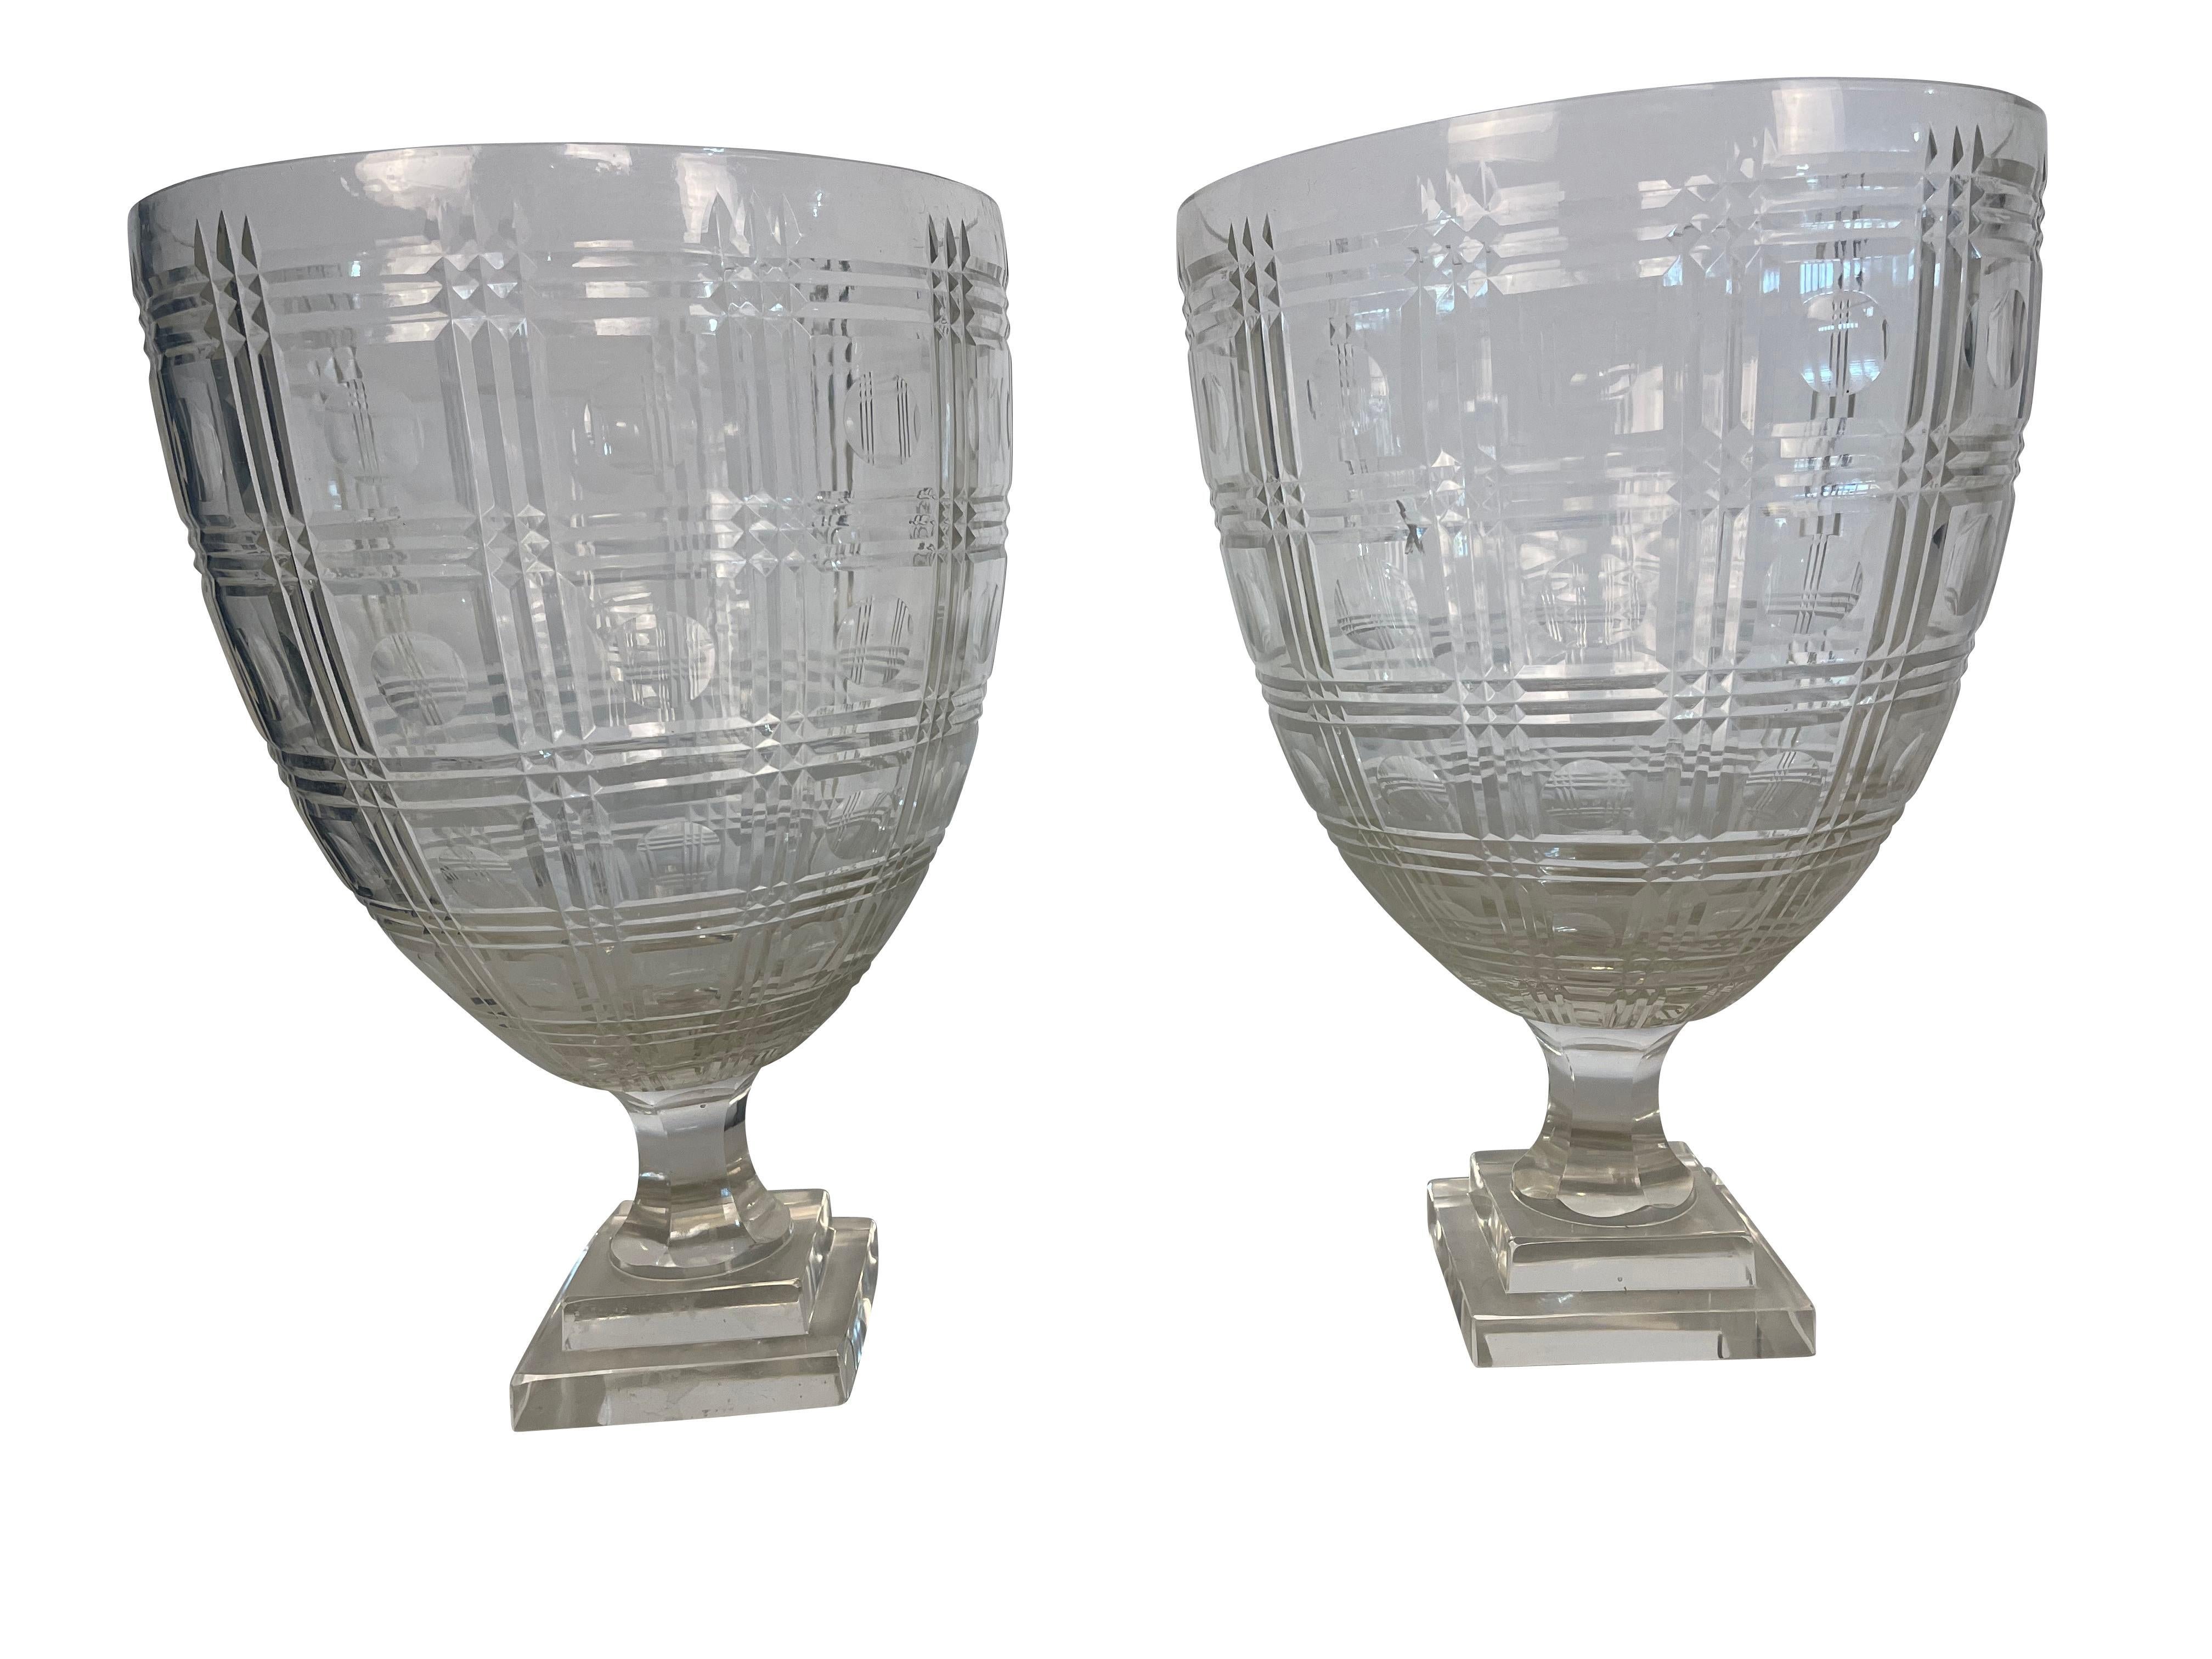 Striking pair of antique glass hurricane shades with Classic form featuring cross-hatched pattern with a dimple thumbprint design within. Lovely antique clear glass hurricanes seated on a raised pedestal with a square base.